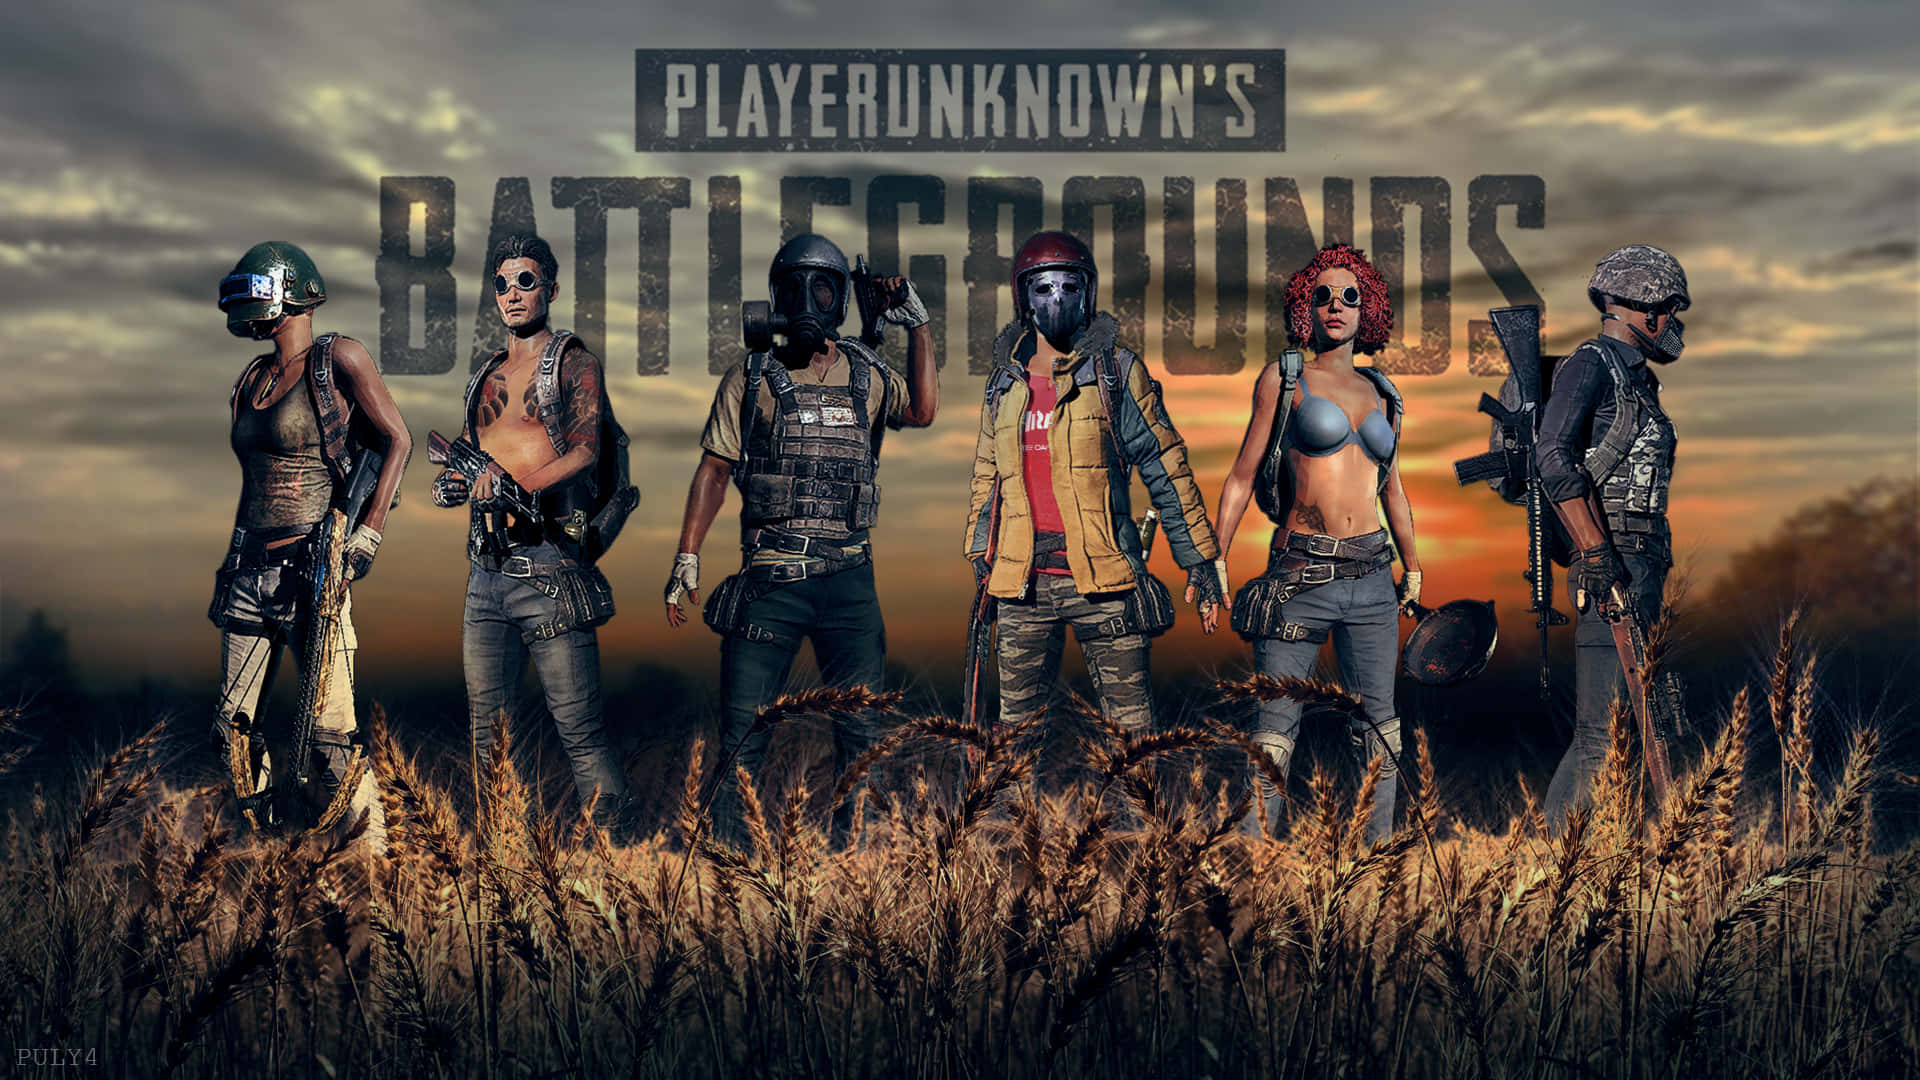 Conquer the battle with Playerunknown's Battlegrounds